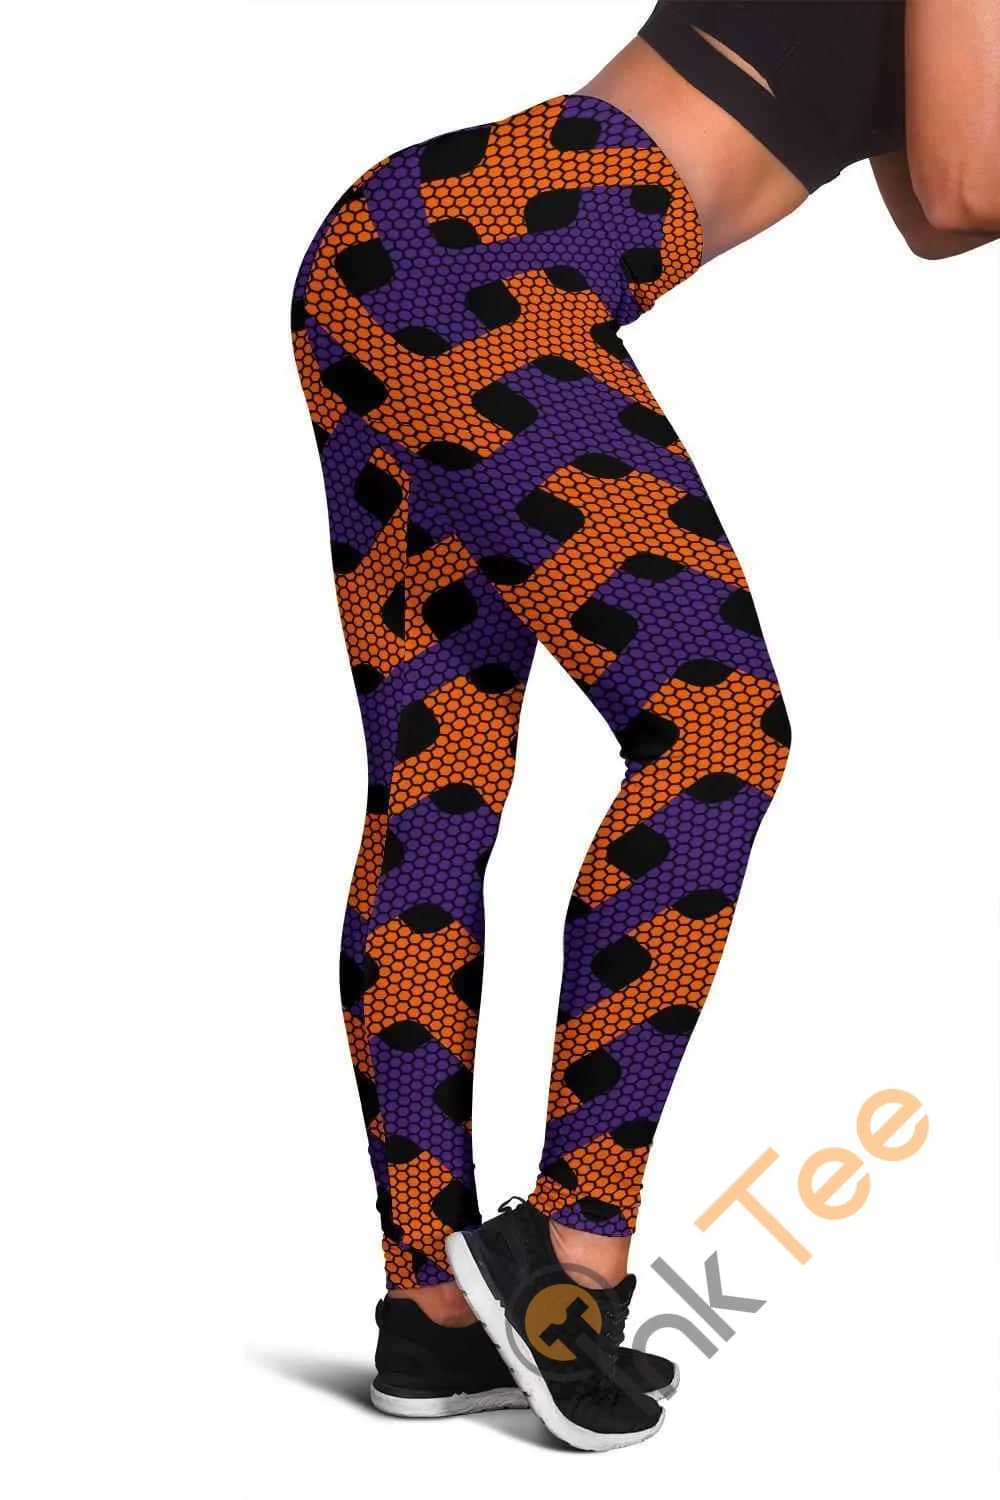 Clemson Tigers Inspired Liberty 3D All Over Print For Yoga Fitness Fashion Women's Leggings